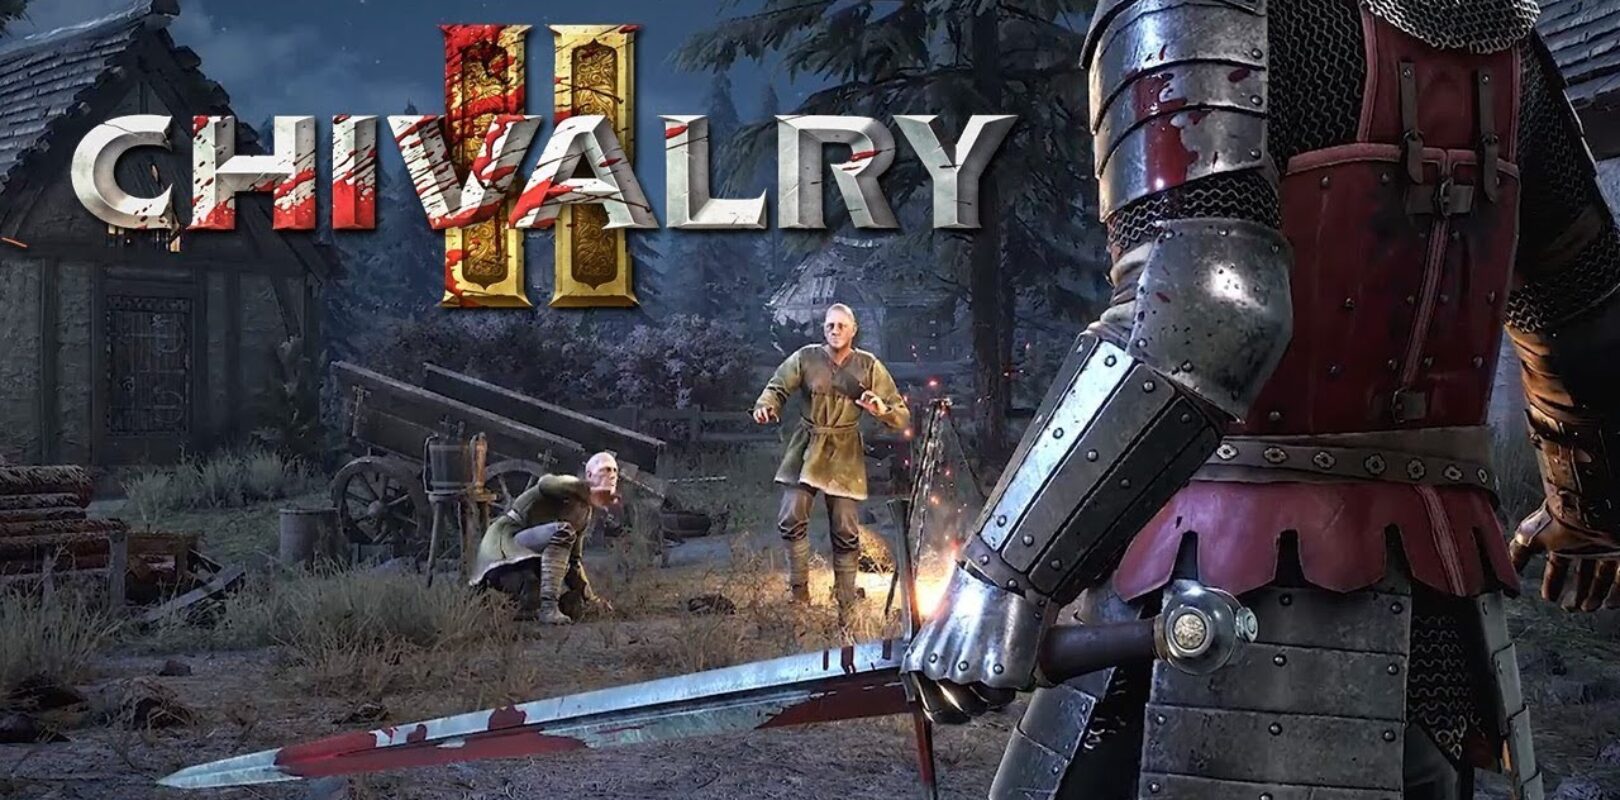 will chivalry 2 be on steam